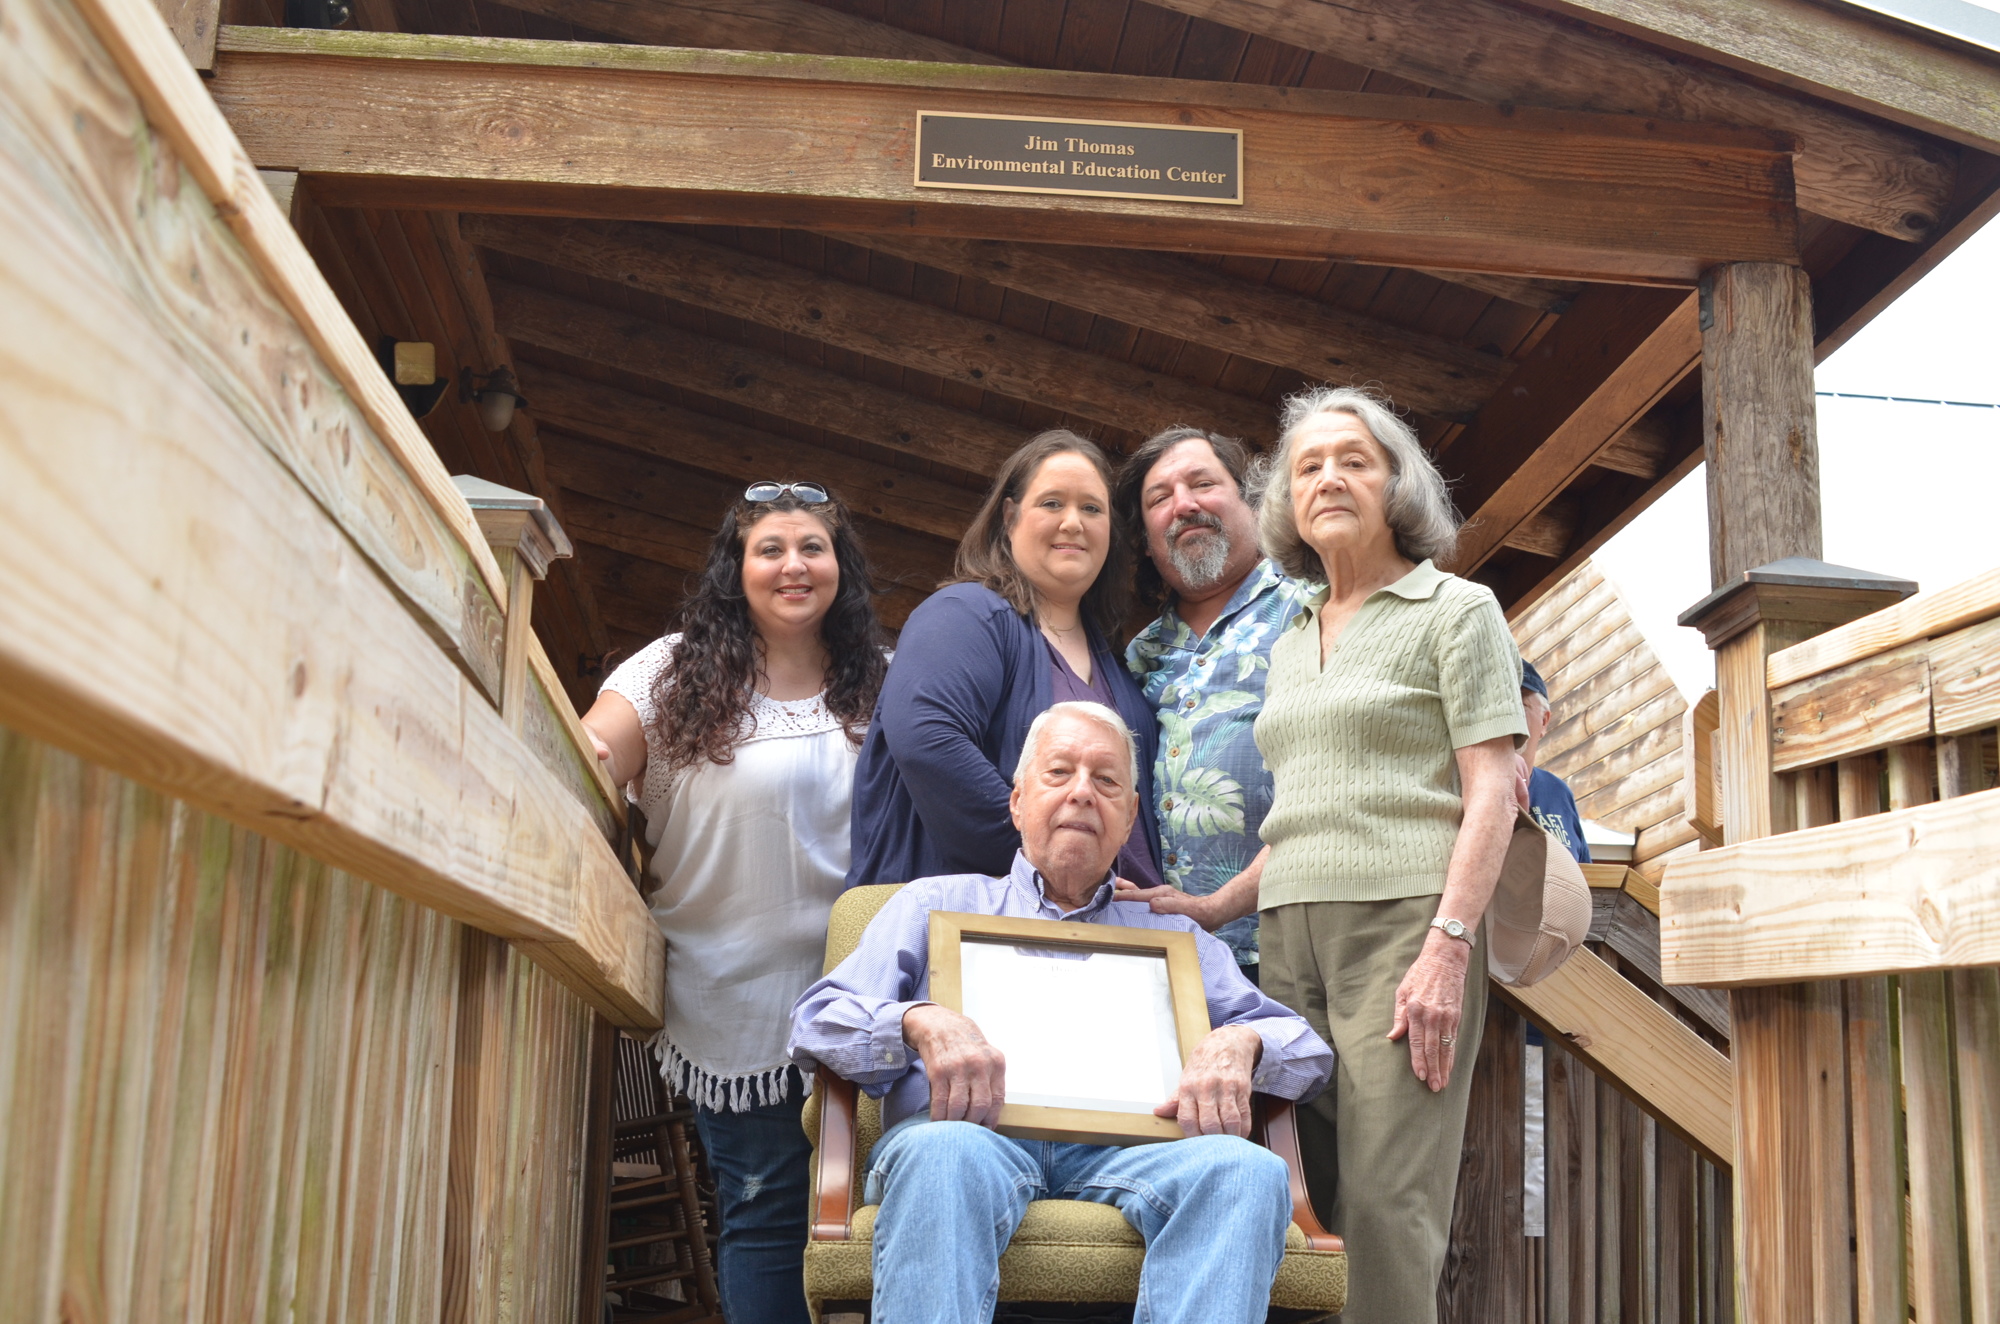 The Thomas family was present for the official naming of the headquarters at ONP — The Jim Thomas Environmental Education Center. With him were his daughter, Ellen McNeil; daughter-in-law and son, Angie and Jay; and wife, Peg.